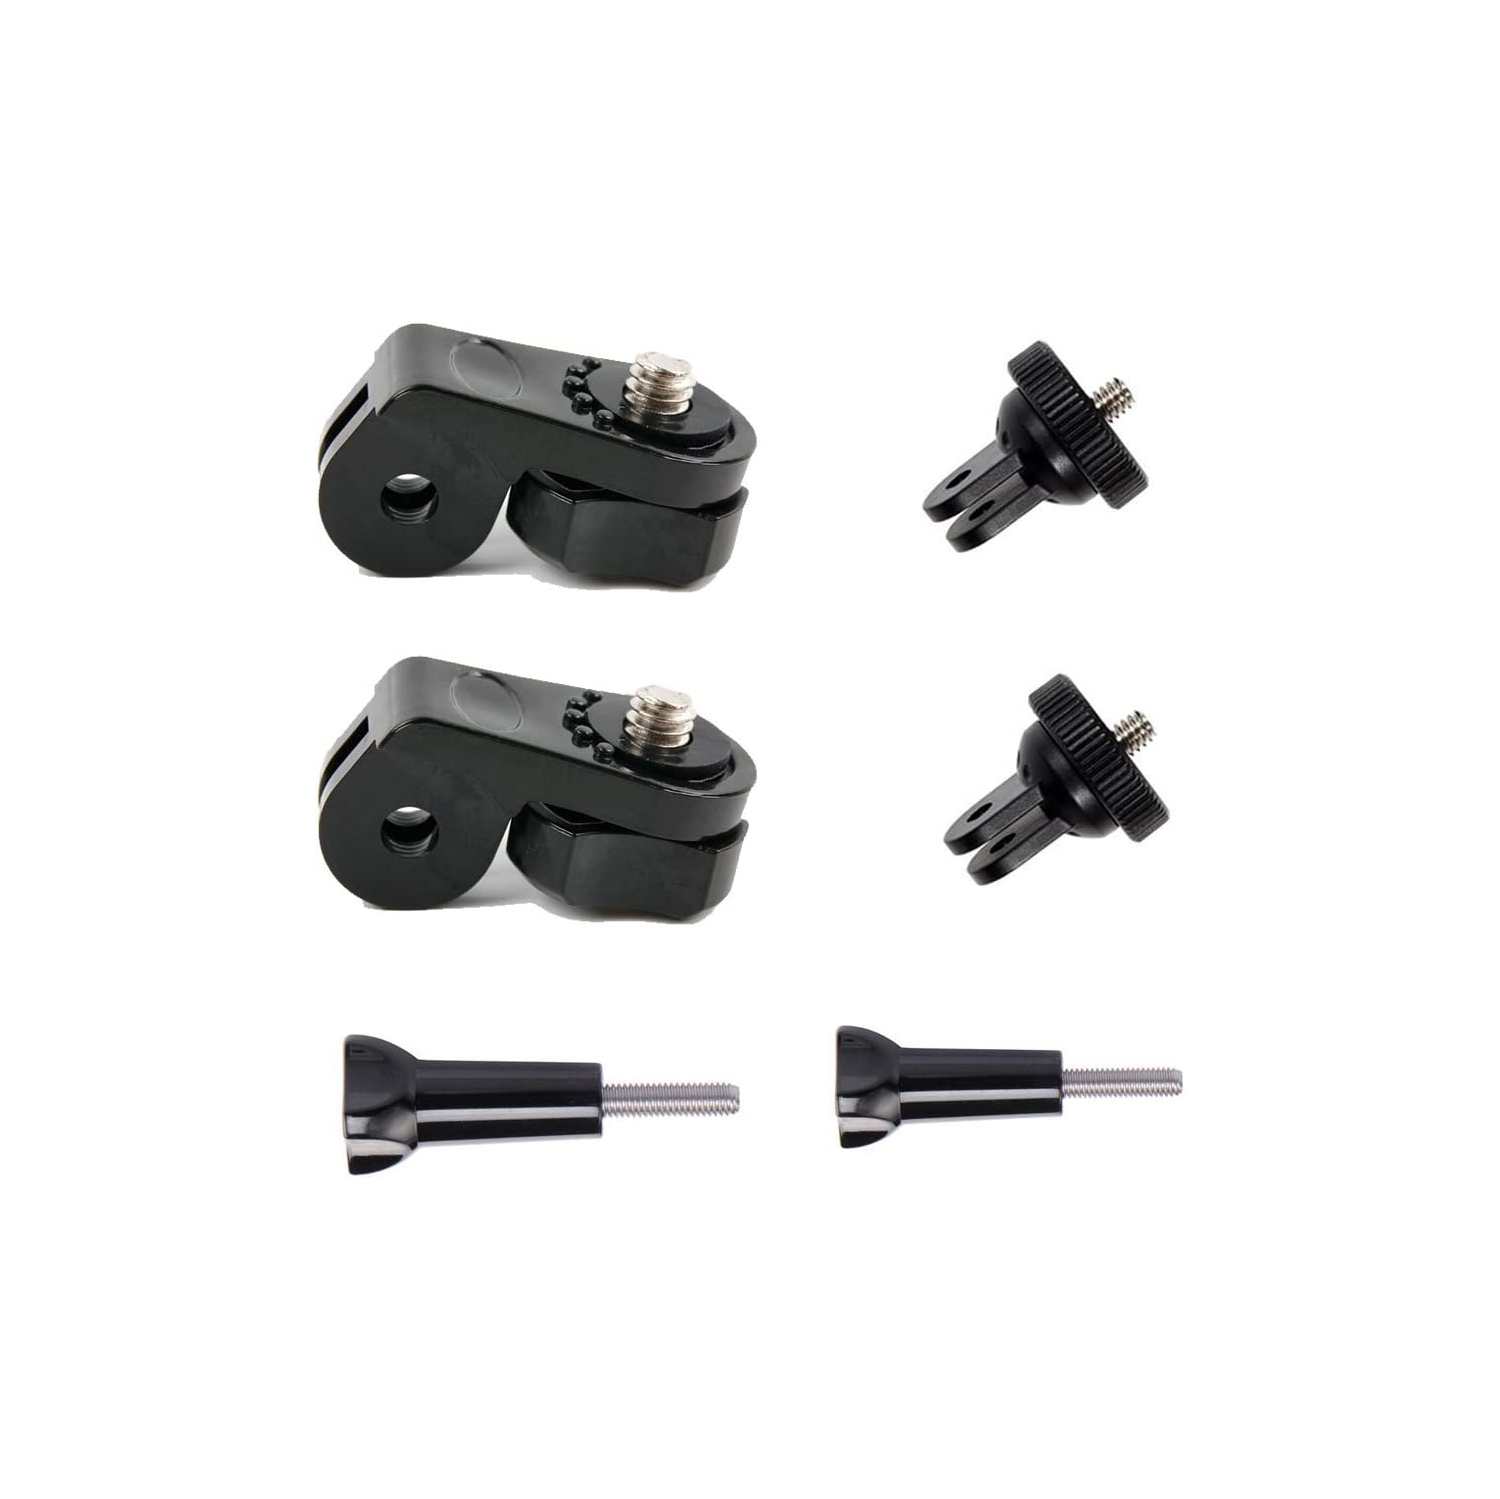 Action Camera Mount Universal Conversion Adapter Set (1/4 Inch 20) Tripod Screw Mount Accessories Compatible with Sony Cam Xiaomi or GoPro Insta360 ONE X2 Other Action Camer